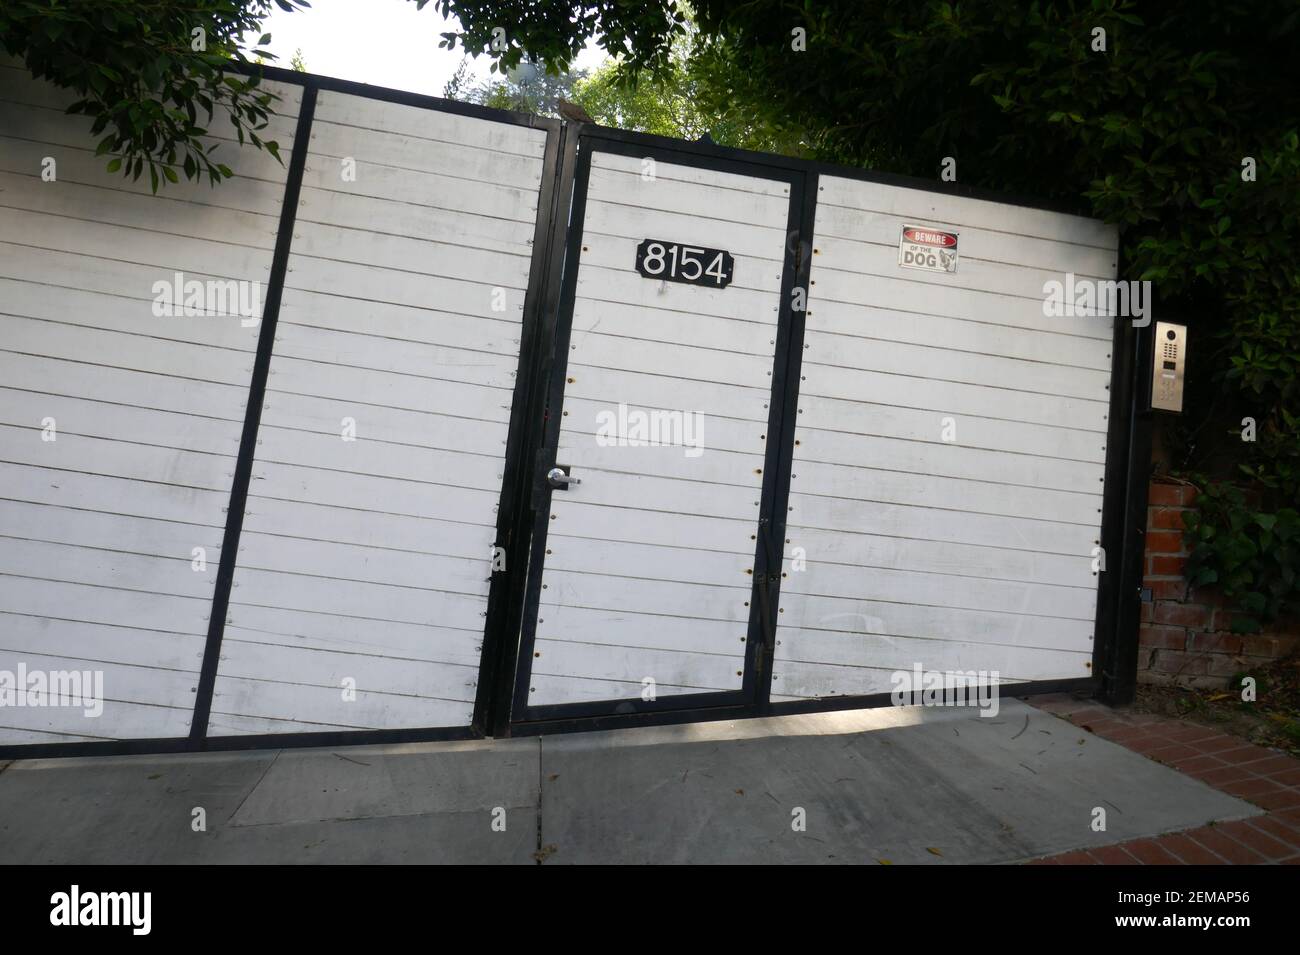 Los Angeles, California, USA 24th February 2021 A general view of atmosphere of actor Joaquin Phoenix's home/house February 24, 2021 Los Angeles, California, USA. Photo by Barry King/Alamy Stock Photo Stock Photo